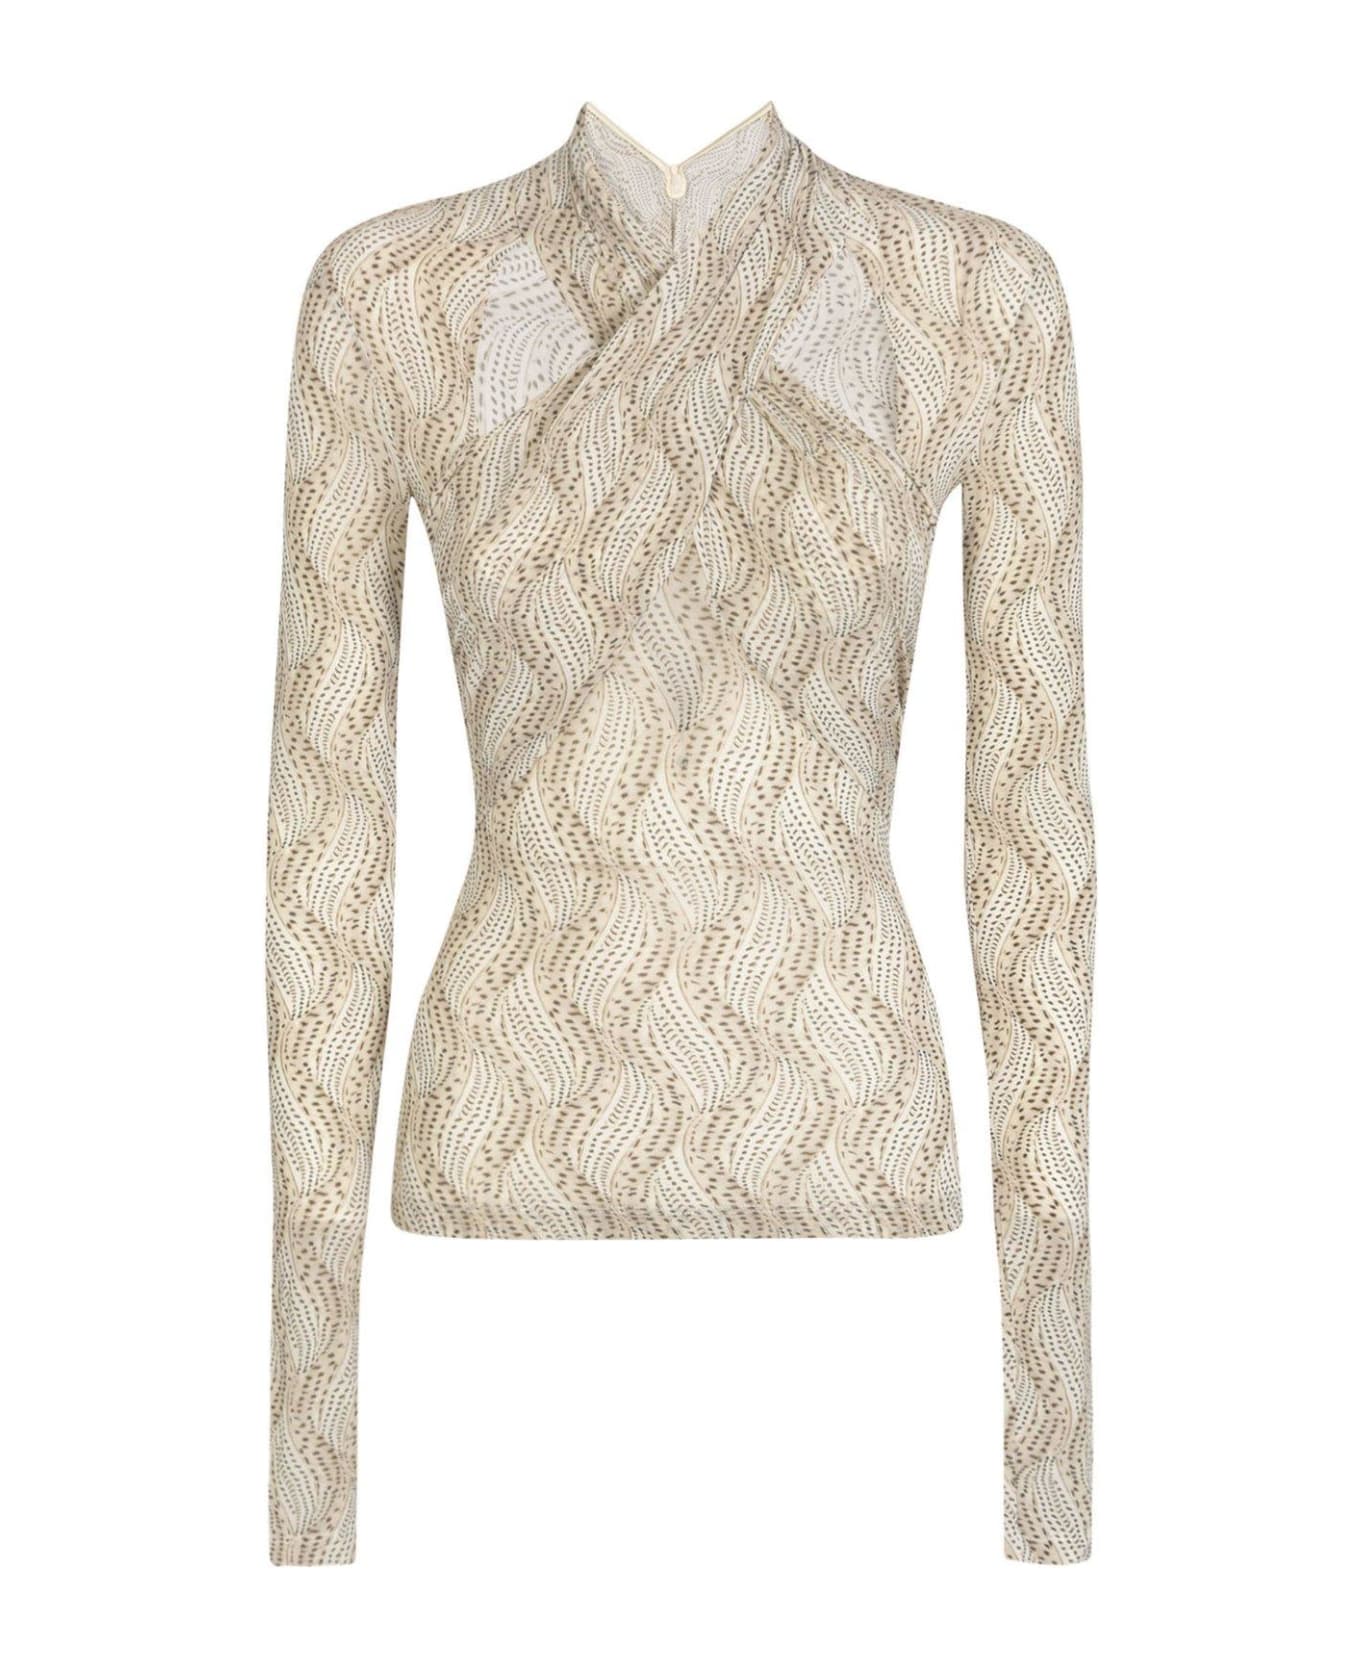 Isabel Marant Cut-out Detailed Crossover Neck Top - Beige